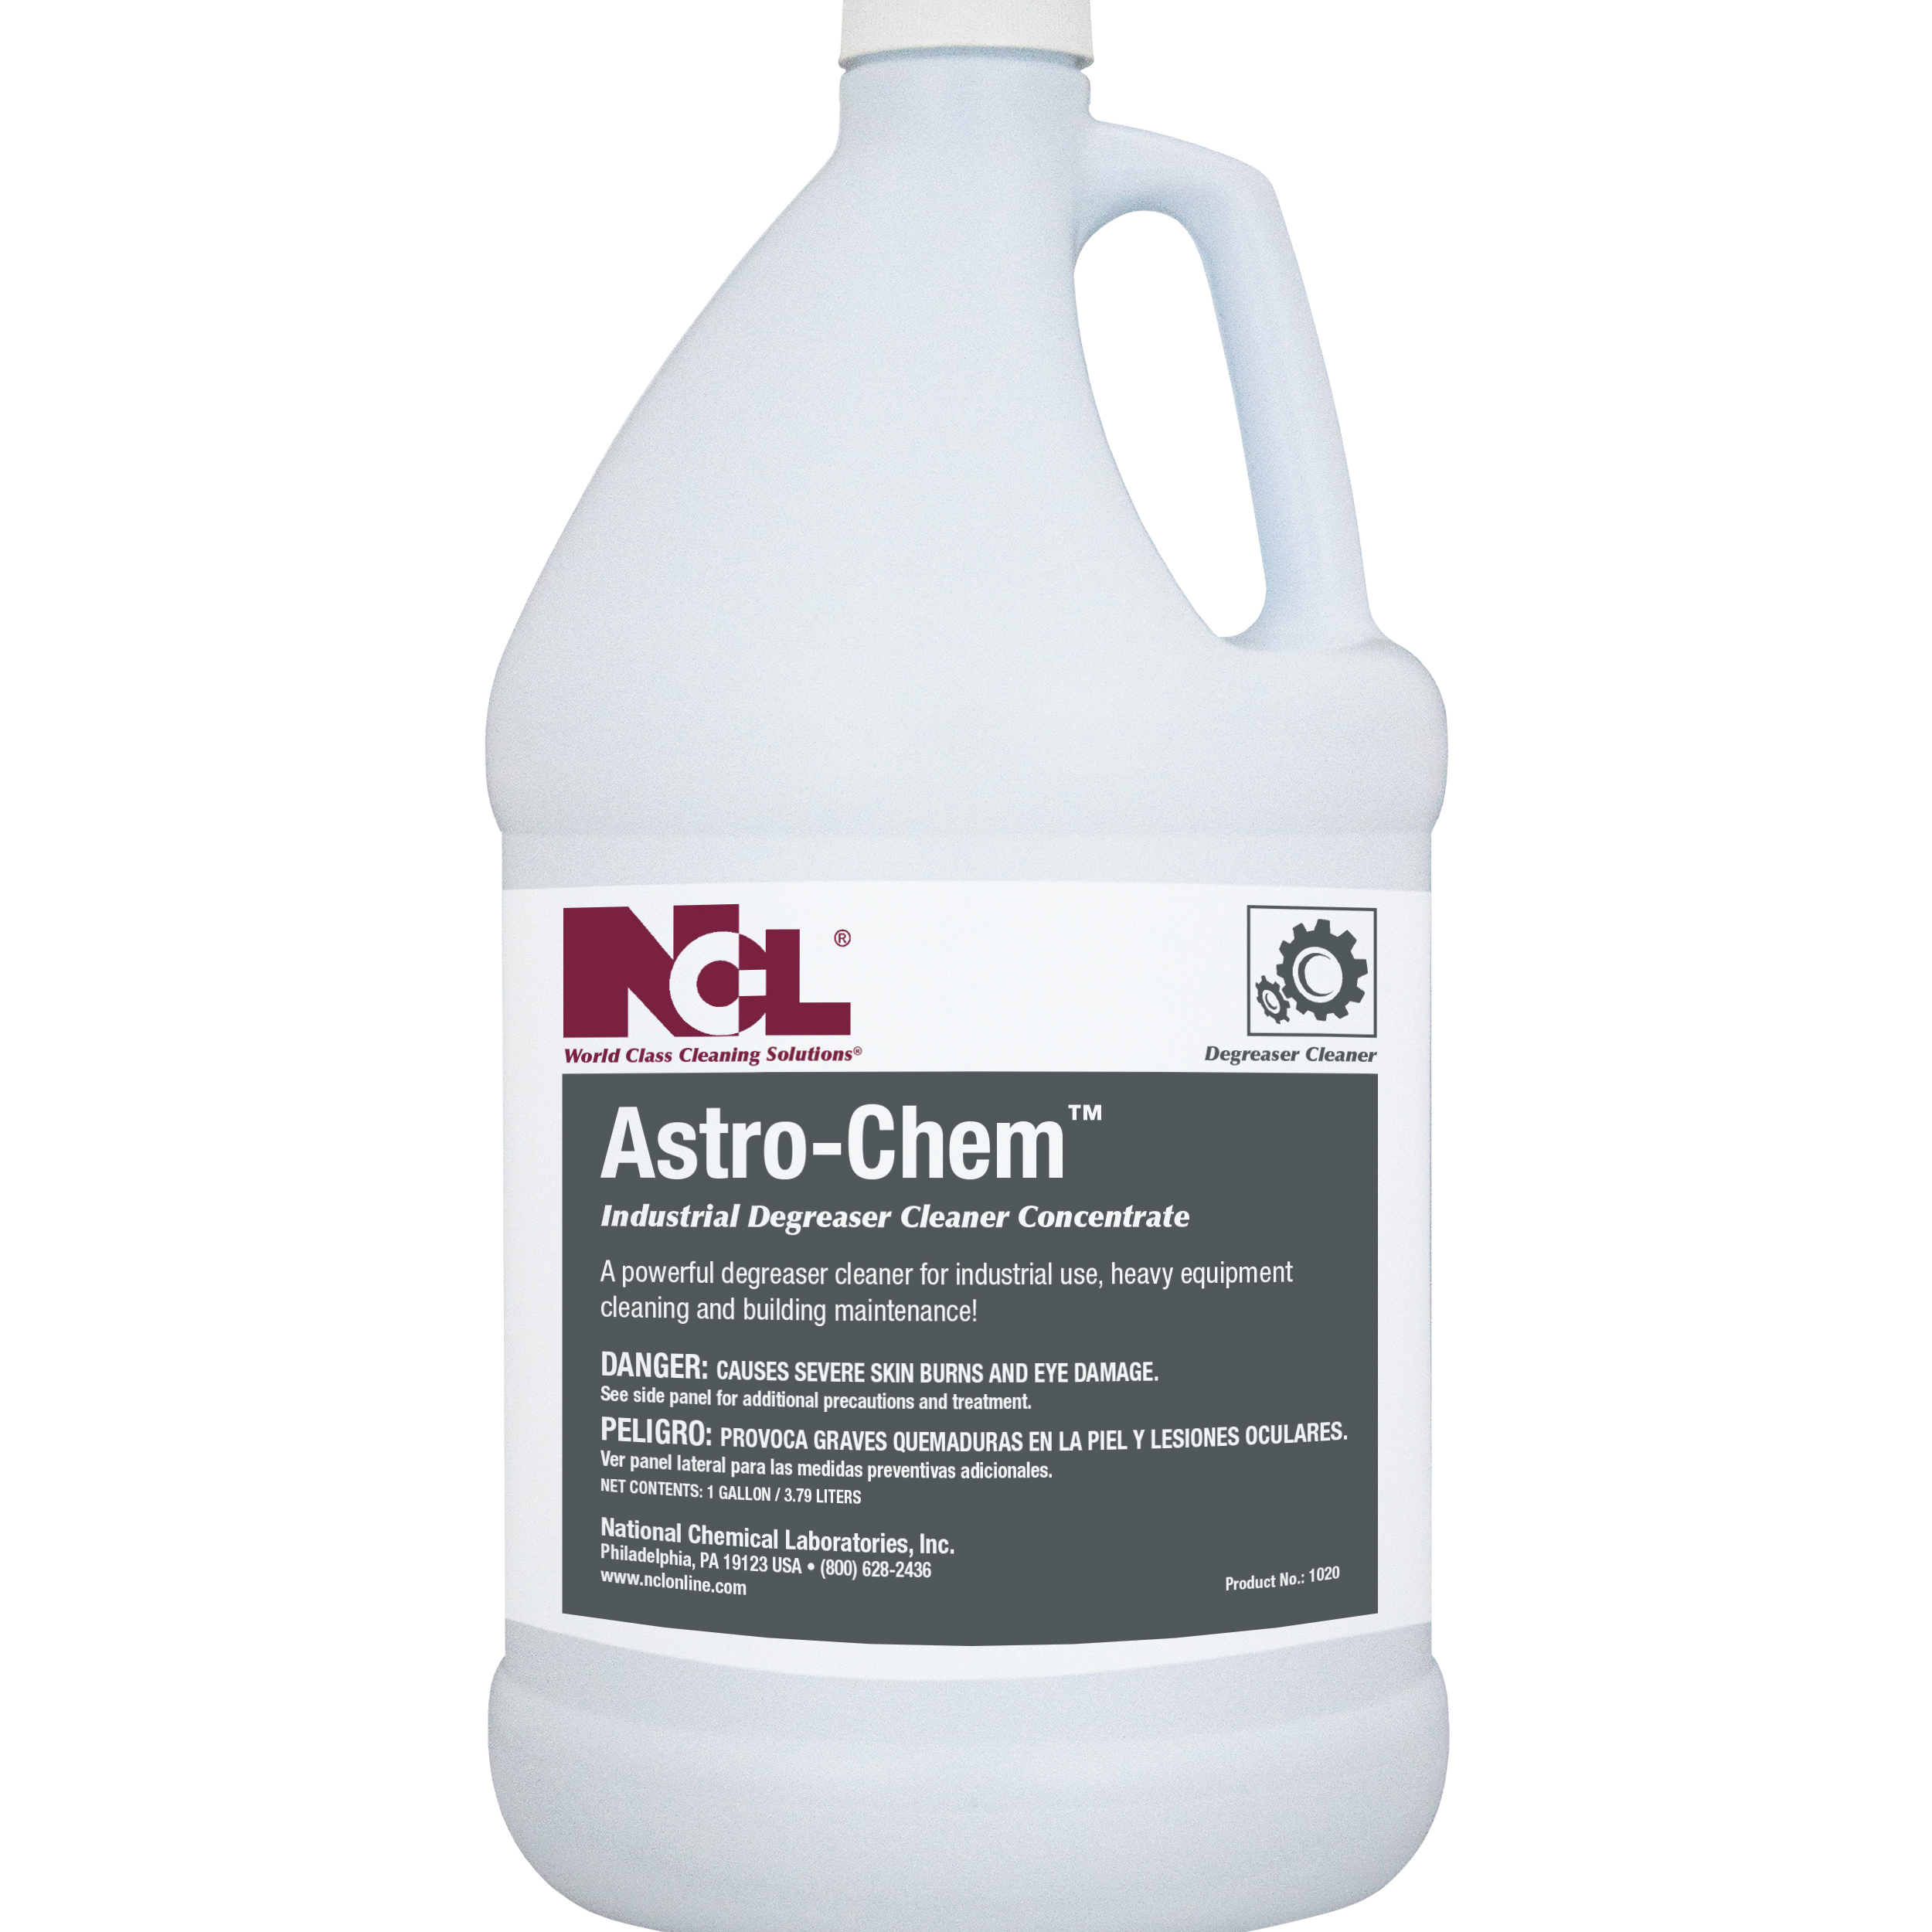  ASTRO-CHEM Industrial Degreaser Cleaner Concentrate 4/1 Gal. Case (NCL1020-29) 